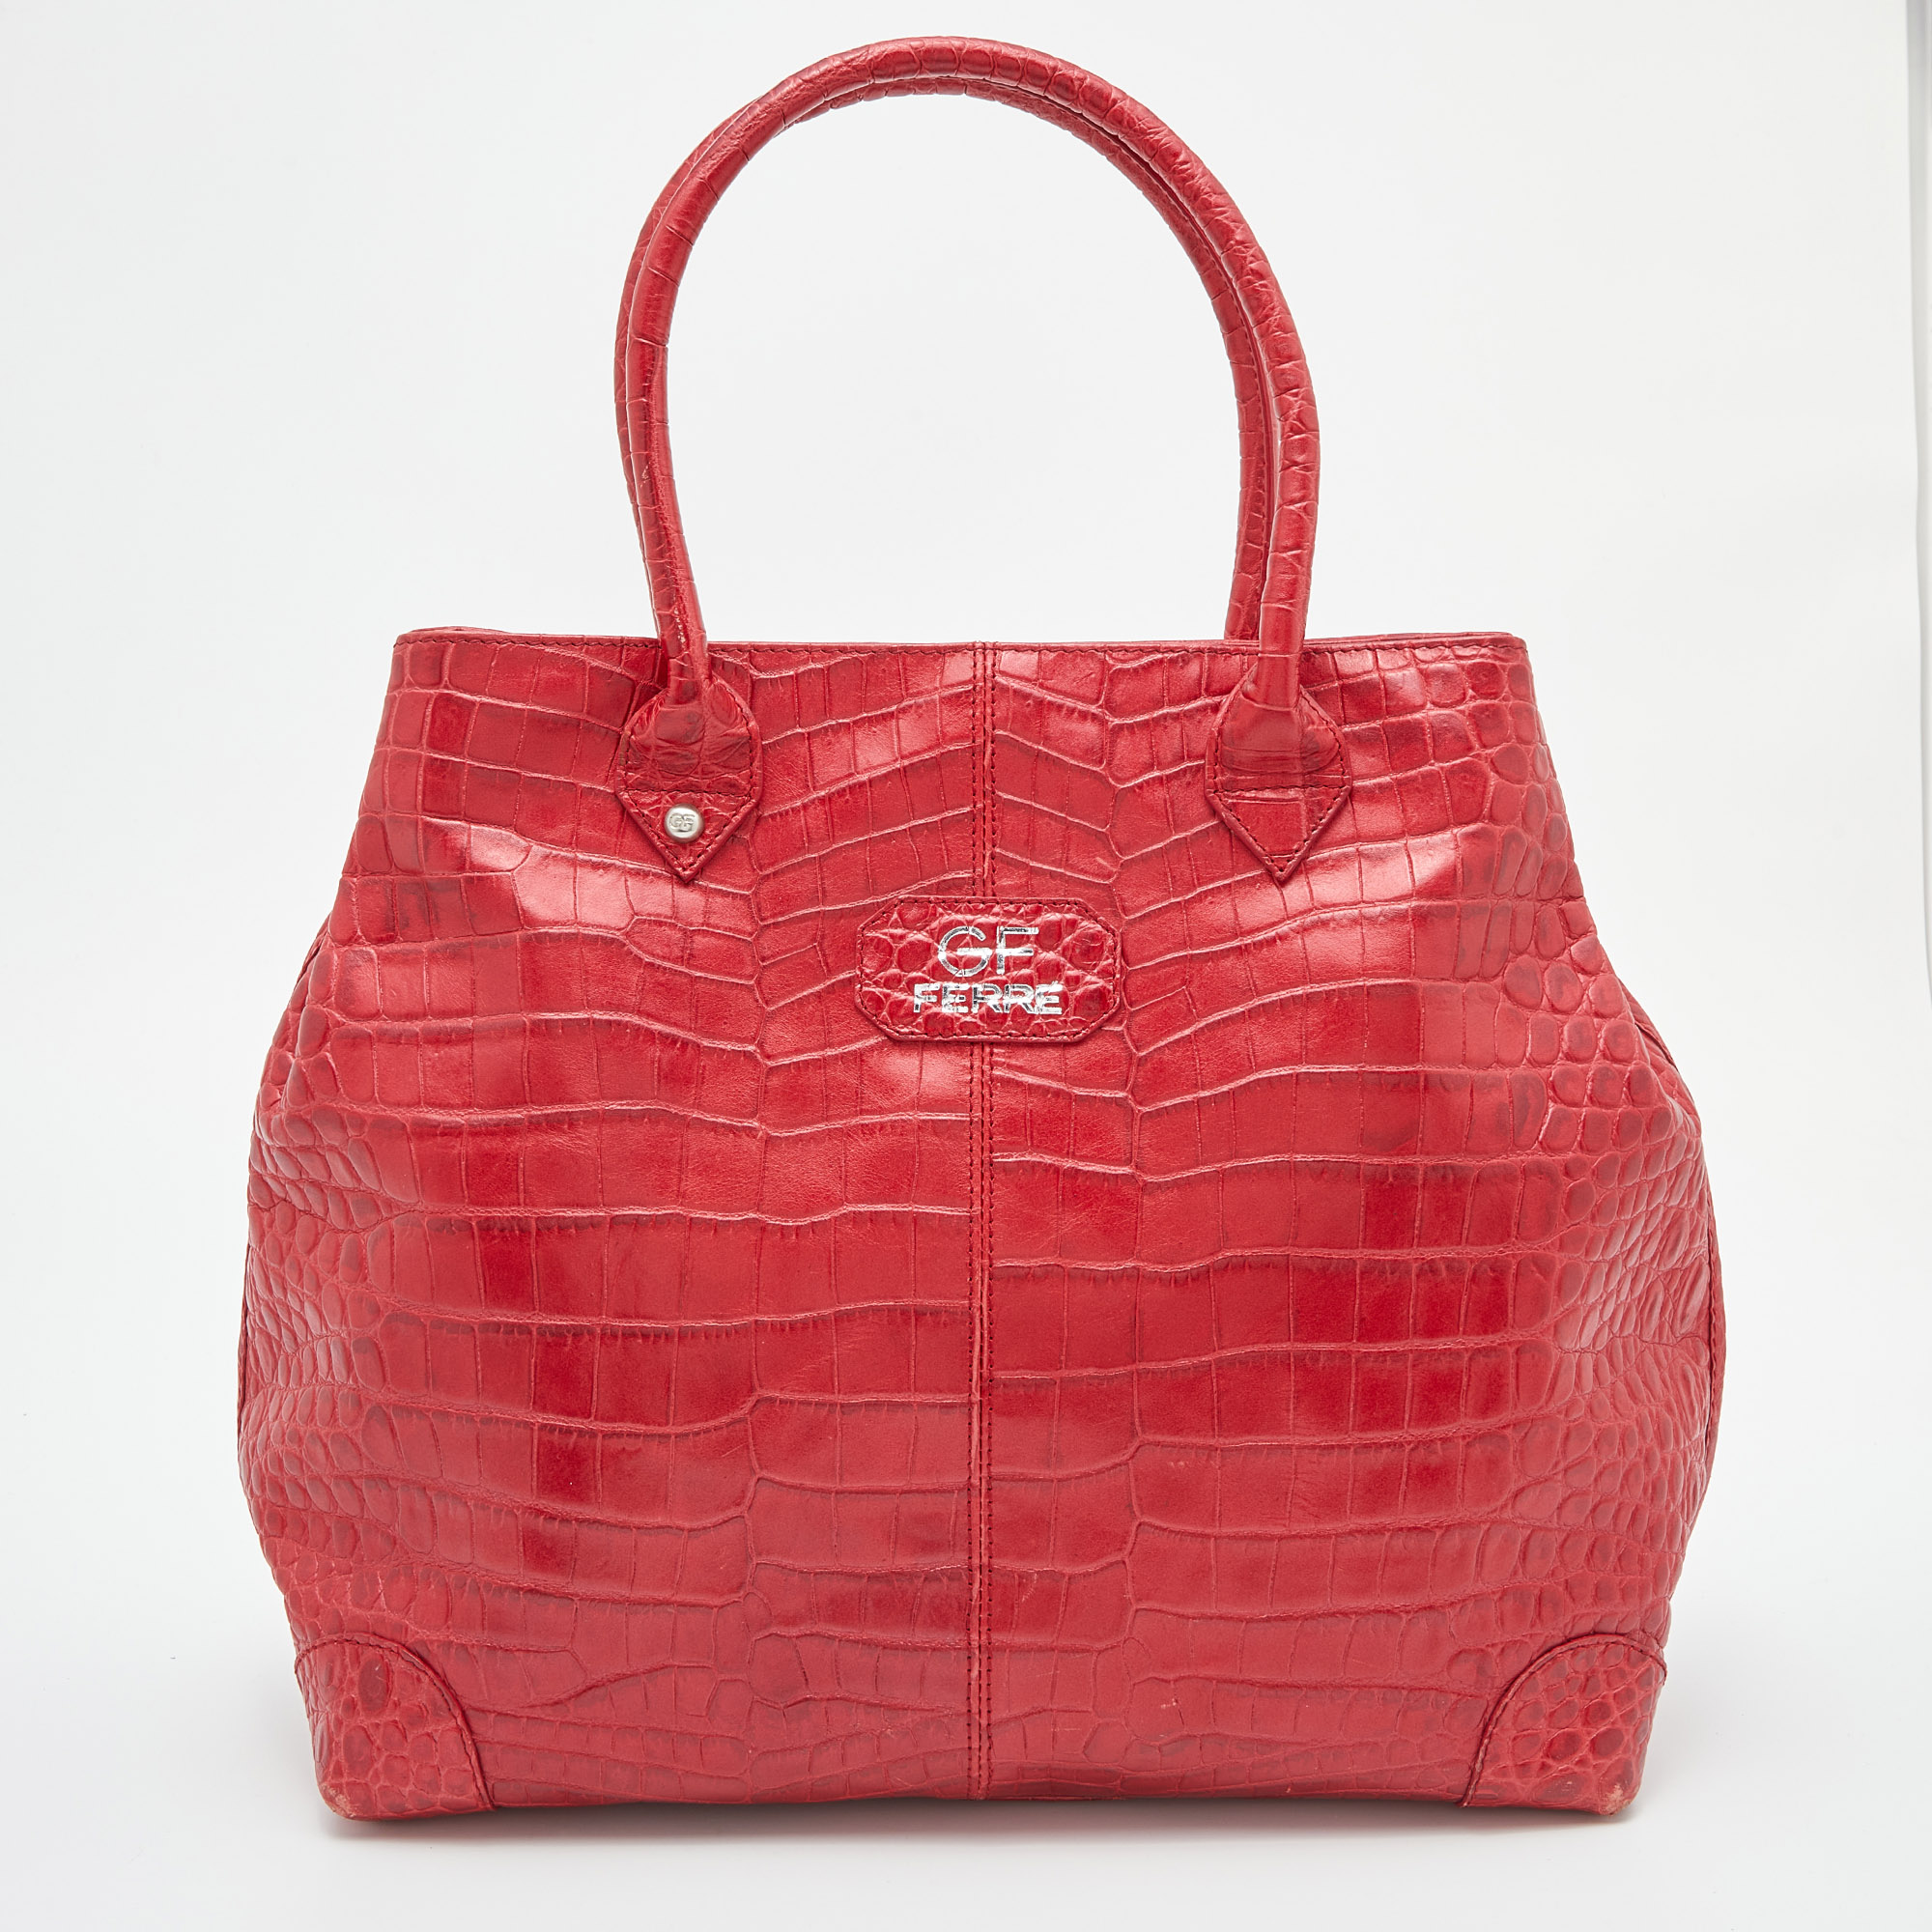 

Gianfranco Ferre Red Croc Embossed Leather Tote